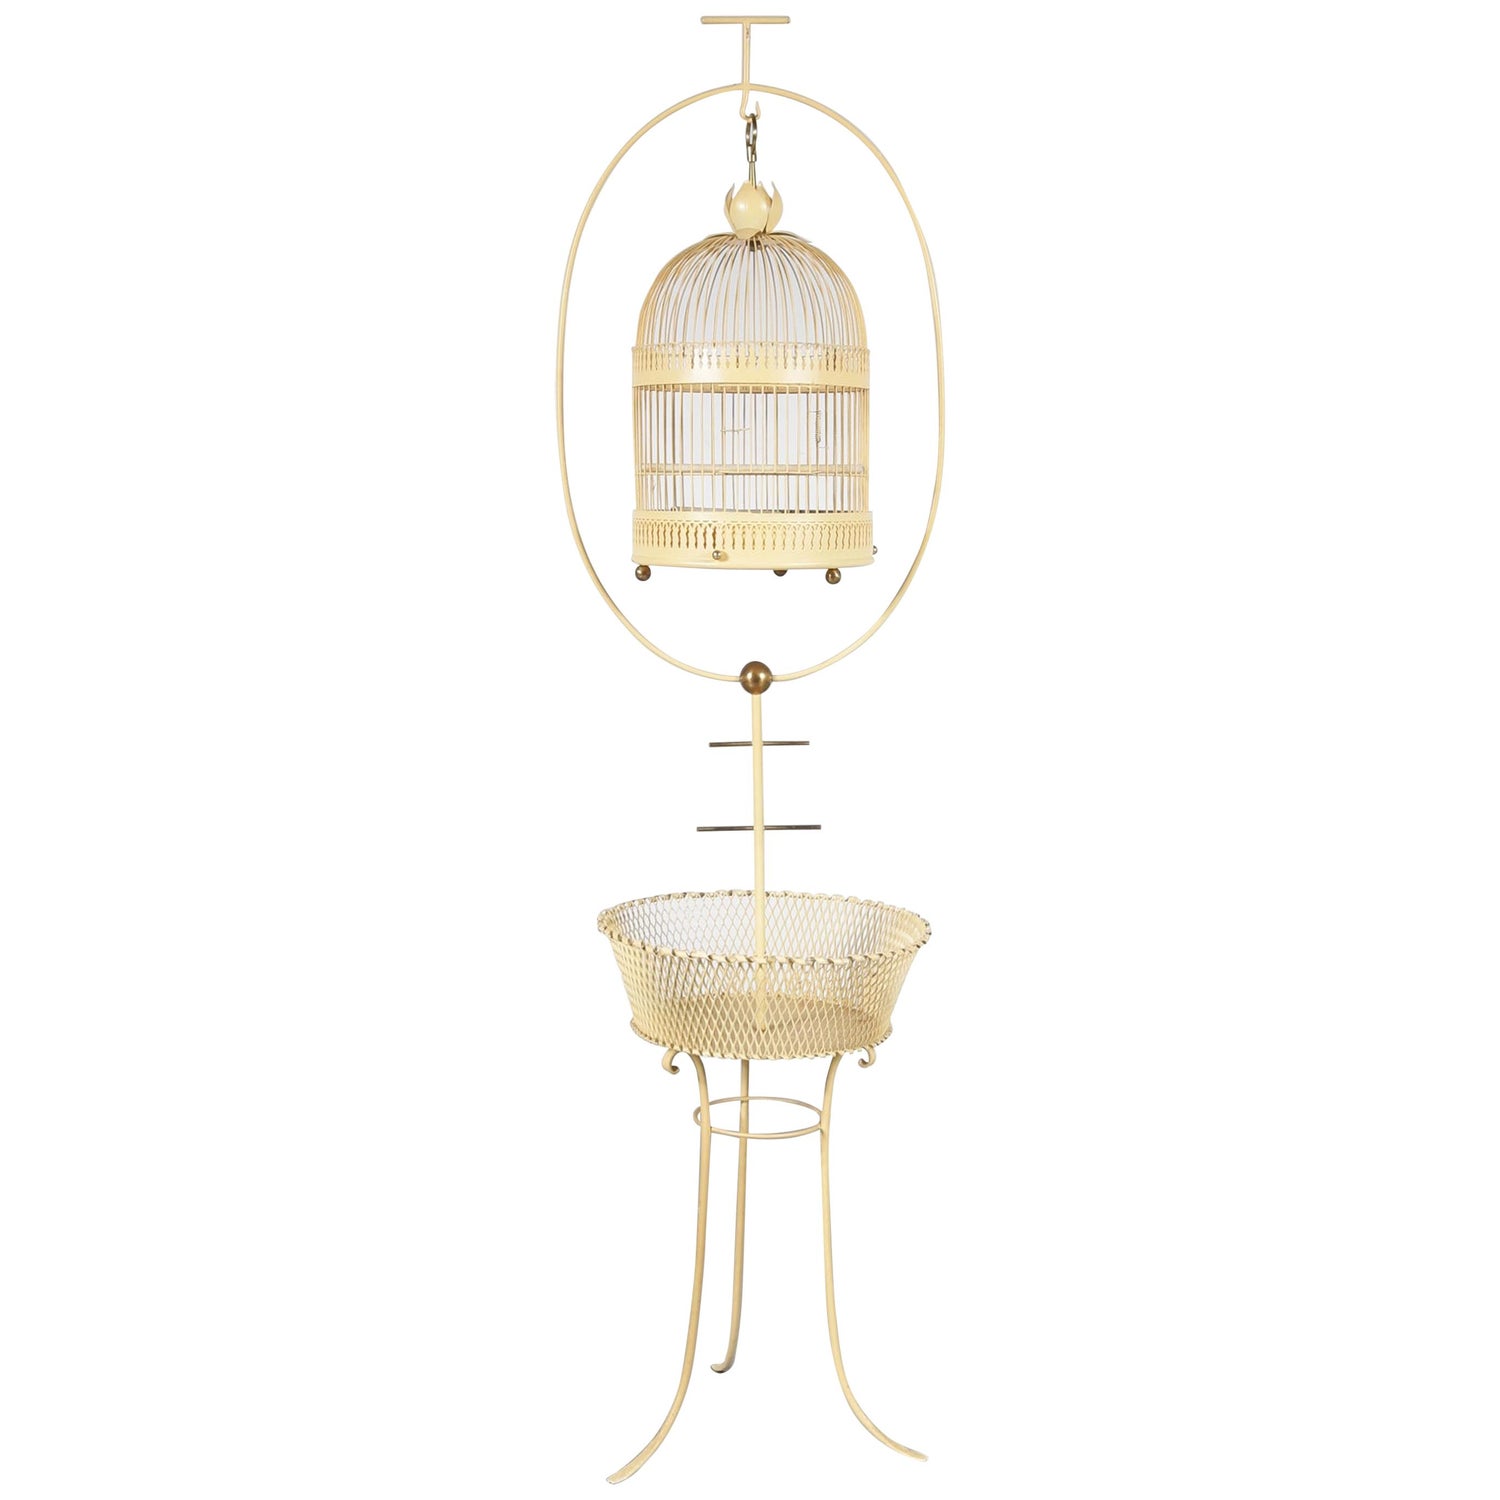 American Art Deco Bird Cage on Stand by Hendryx For Sale at